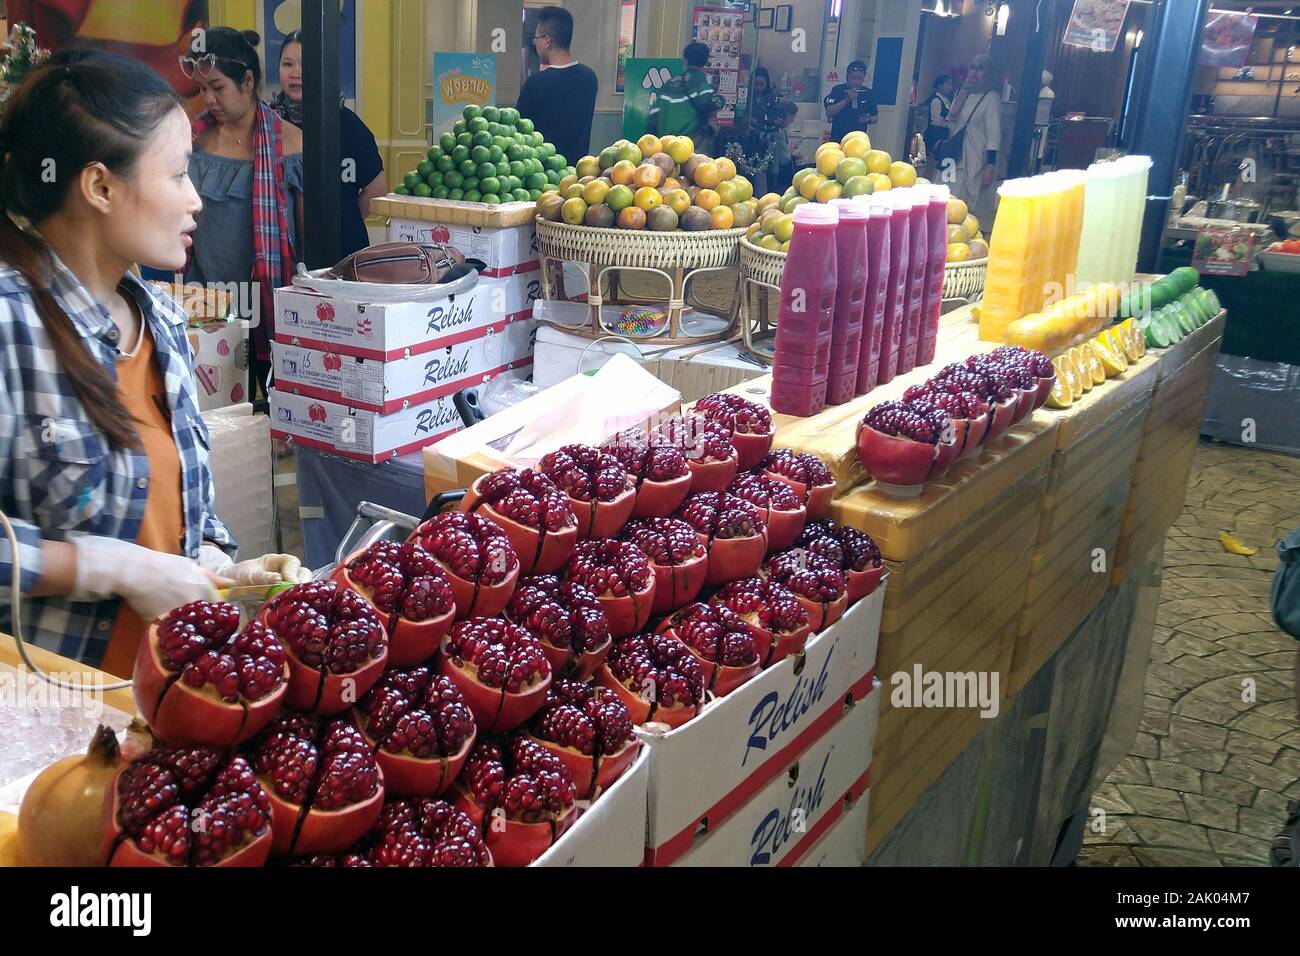 Woman sells pomegranate, orange and lime juices on street market at night. Stock Photo